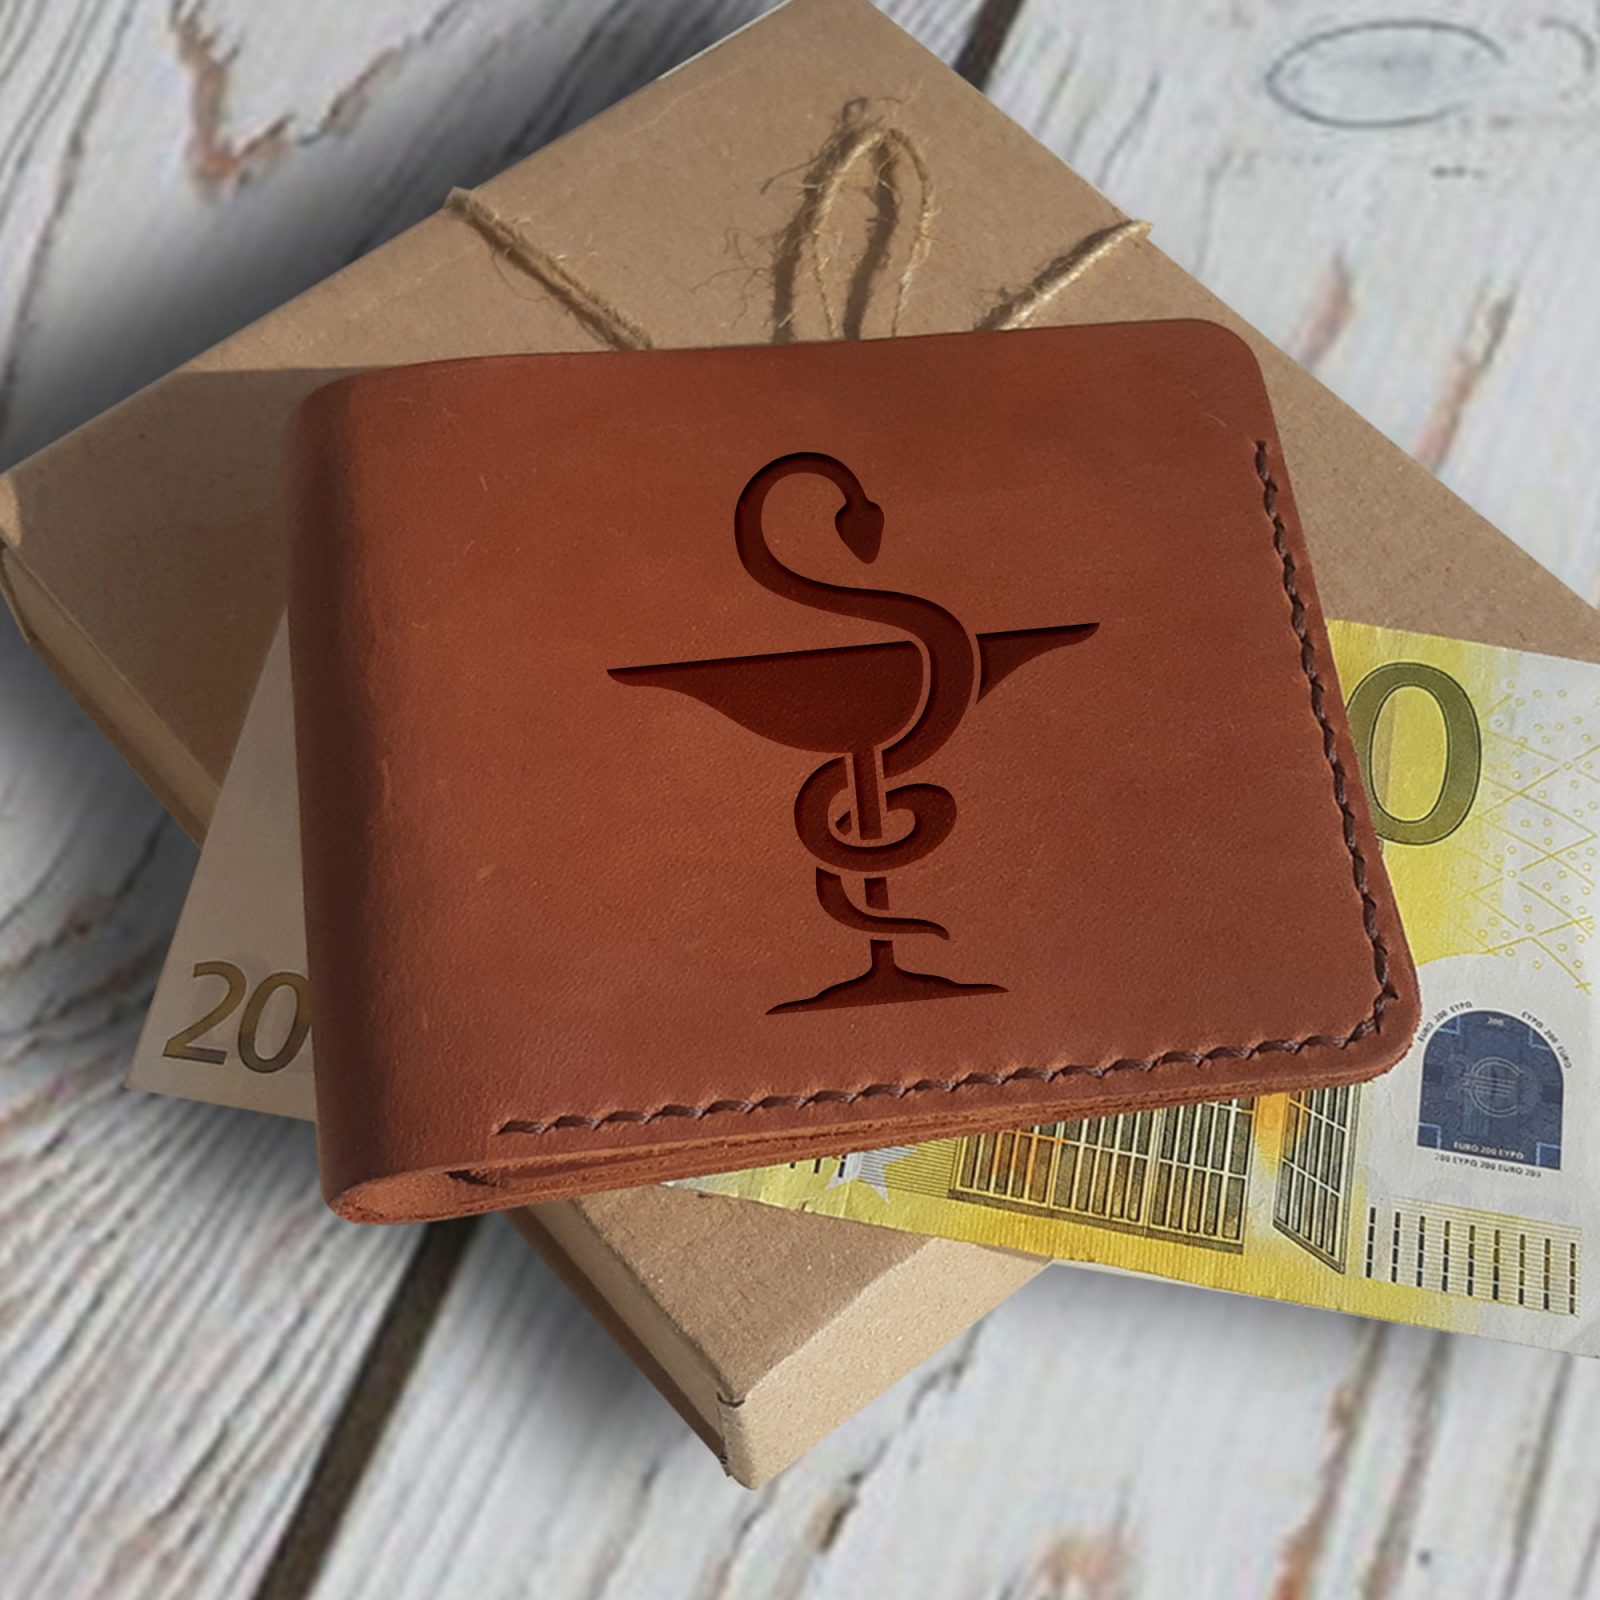 Gifts for your Doctors